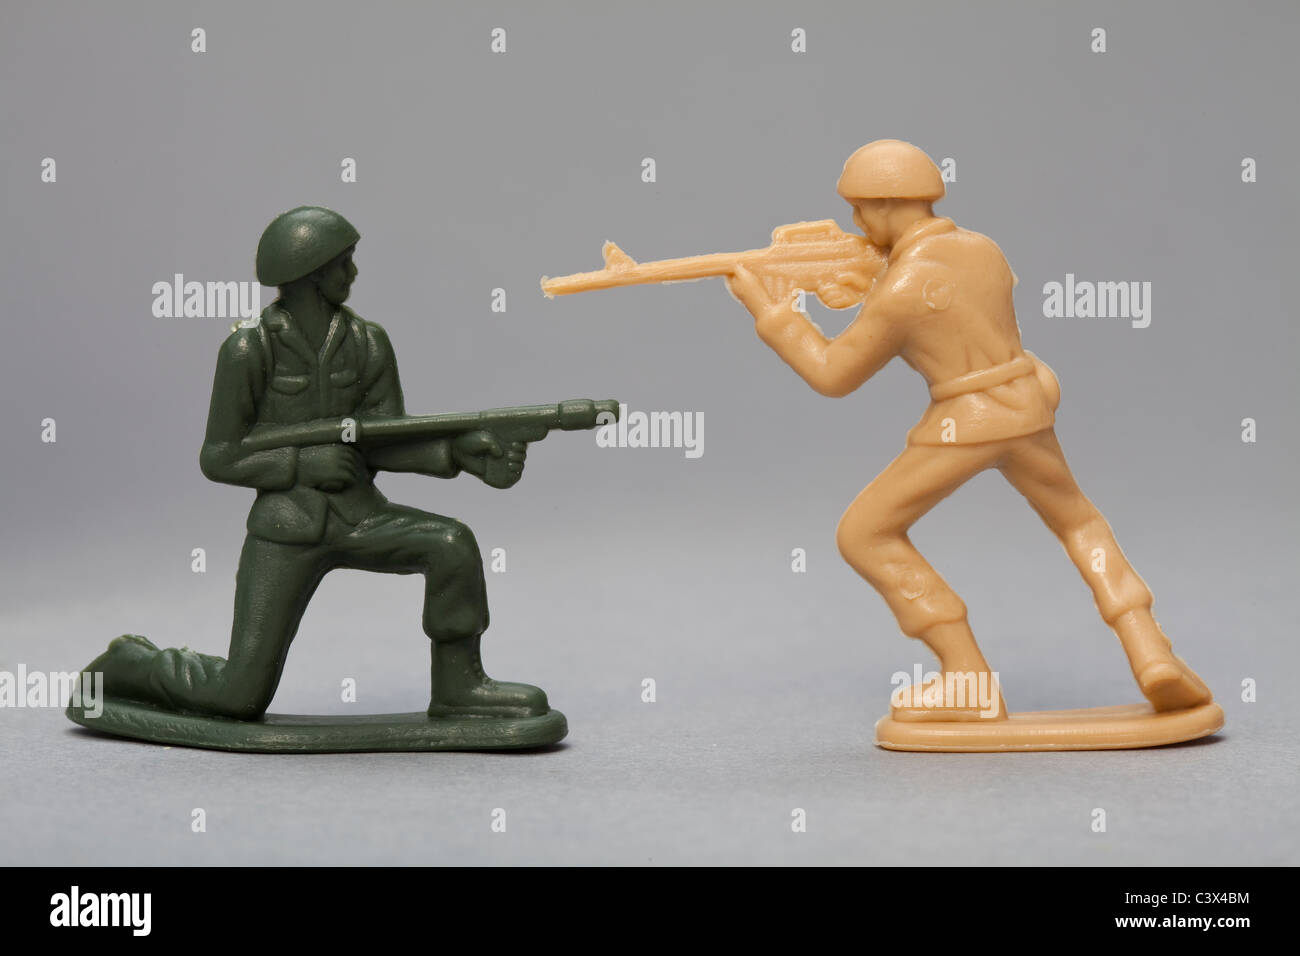 Toy Soldiers firing at each other Stock Photo